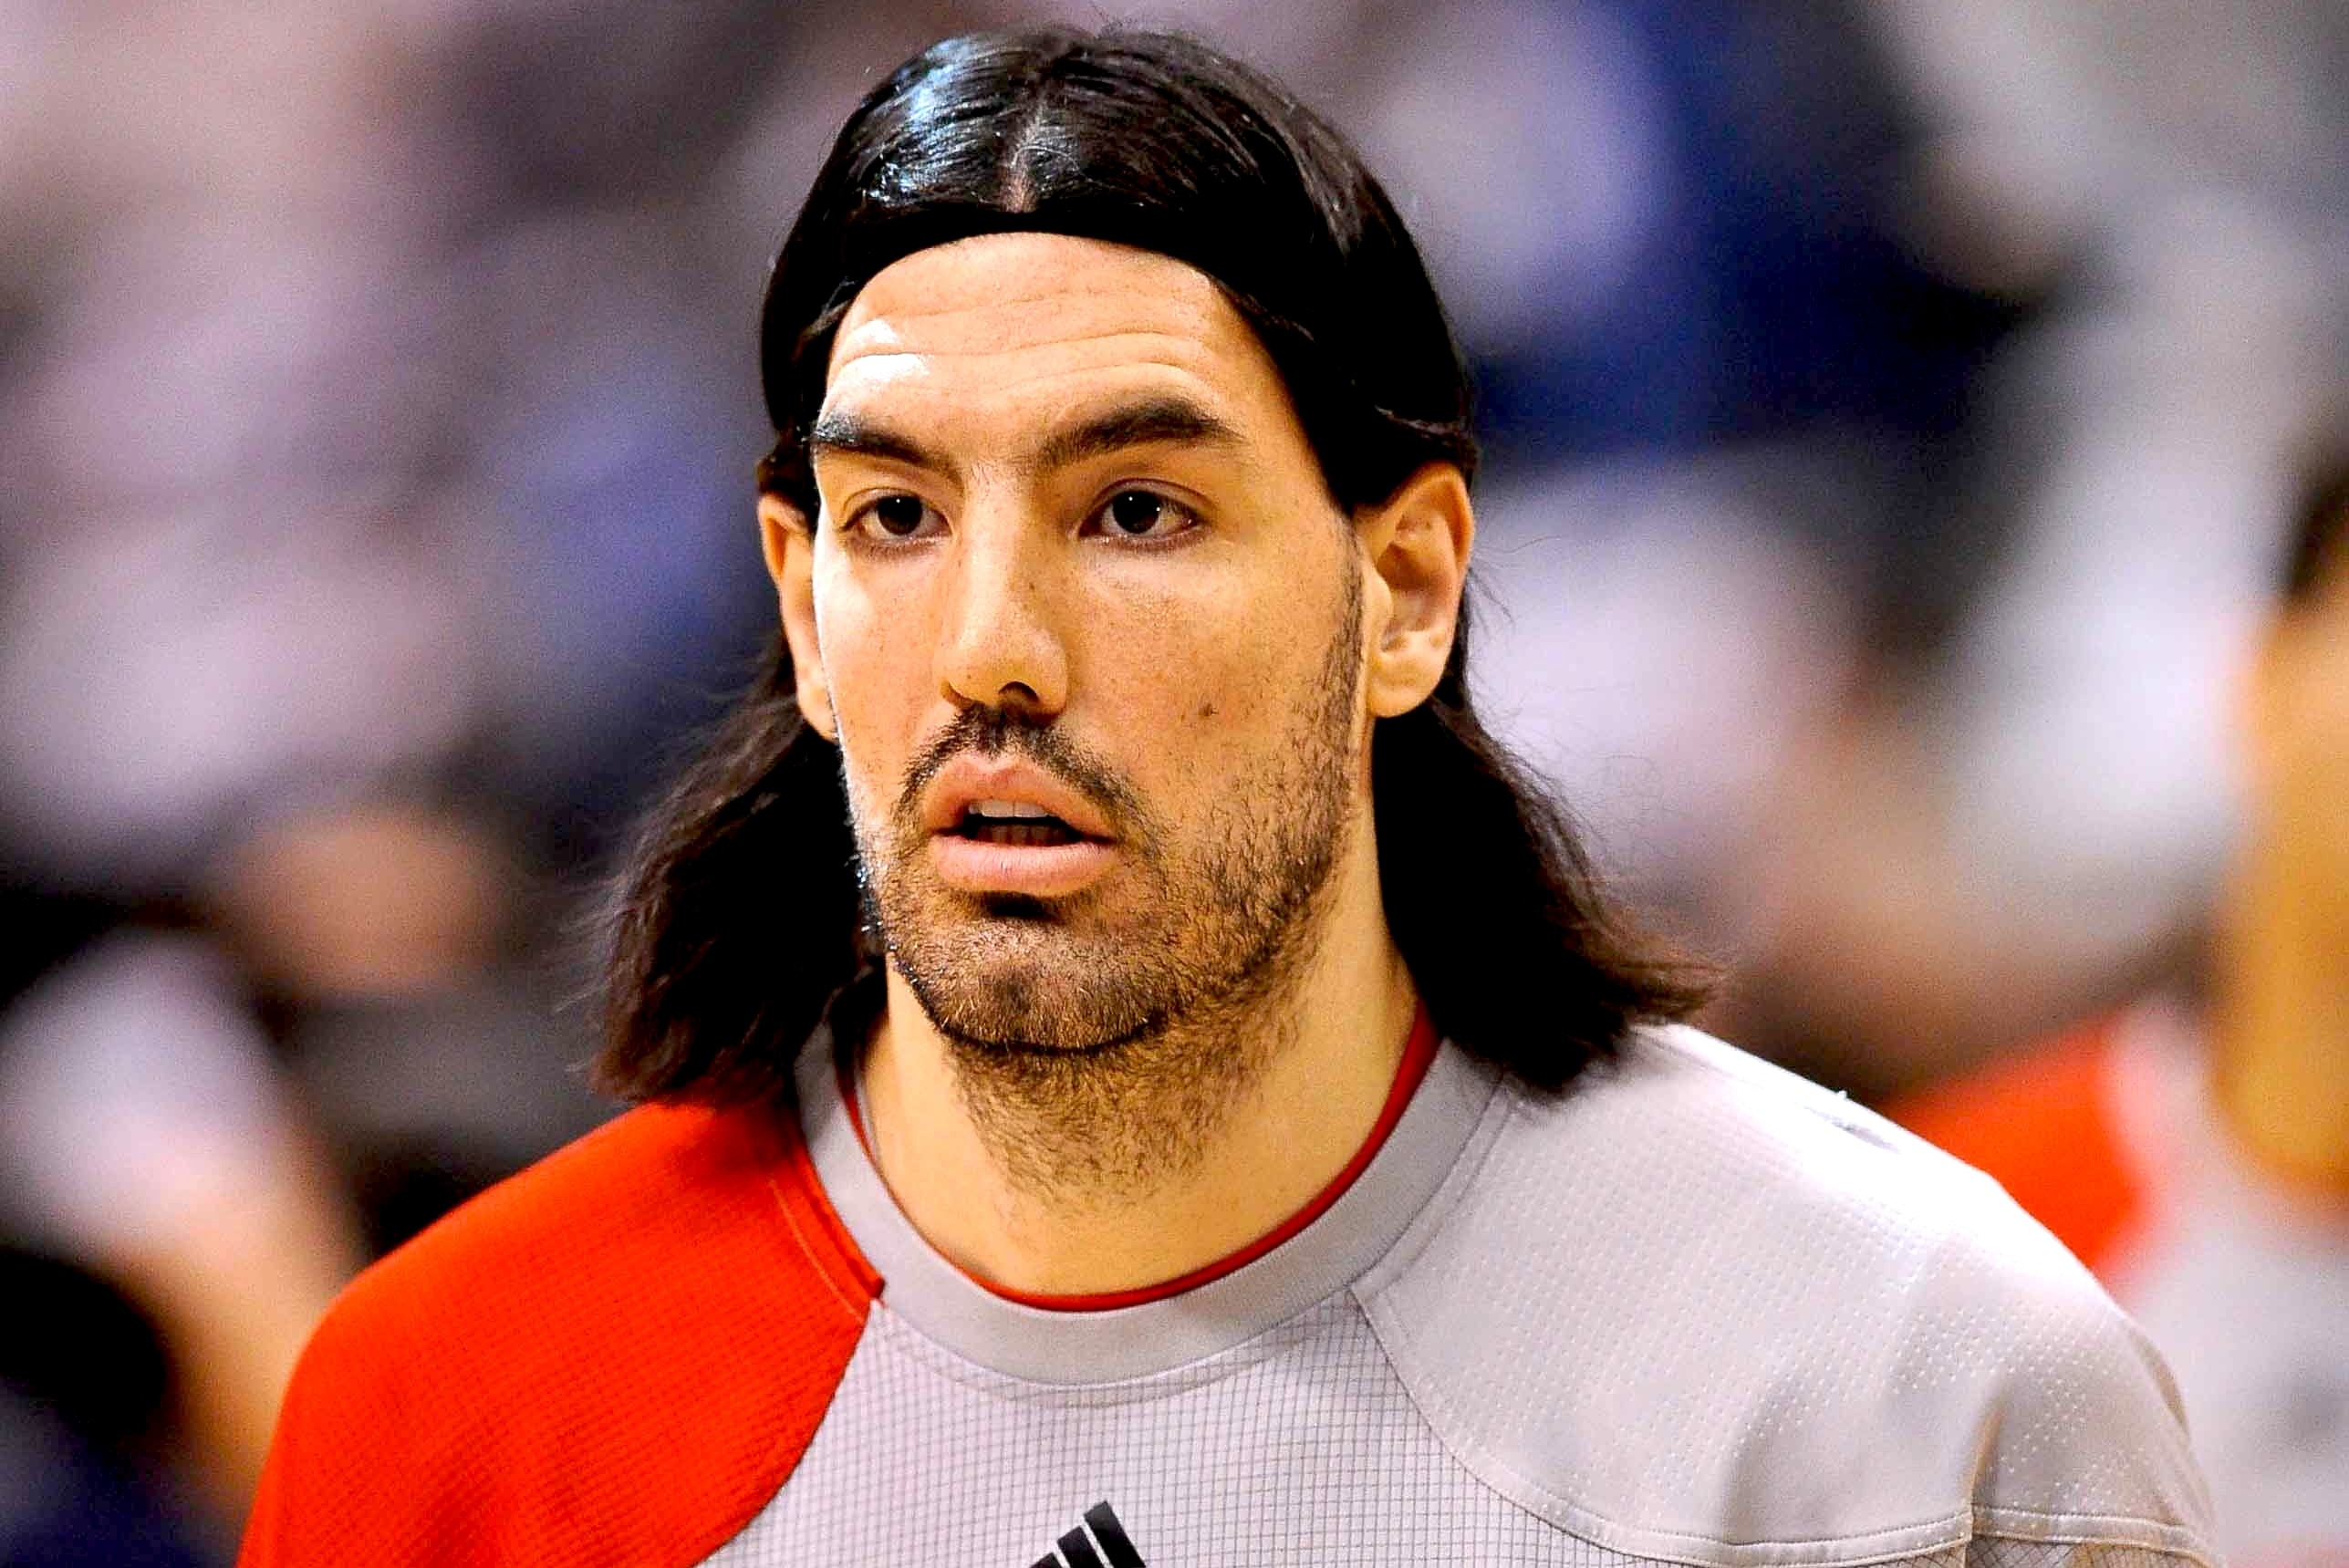 LUIS SCOLA hairstyle one thing to consider when nzcncby - Hair Styles